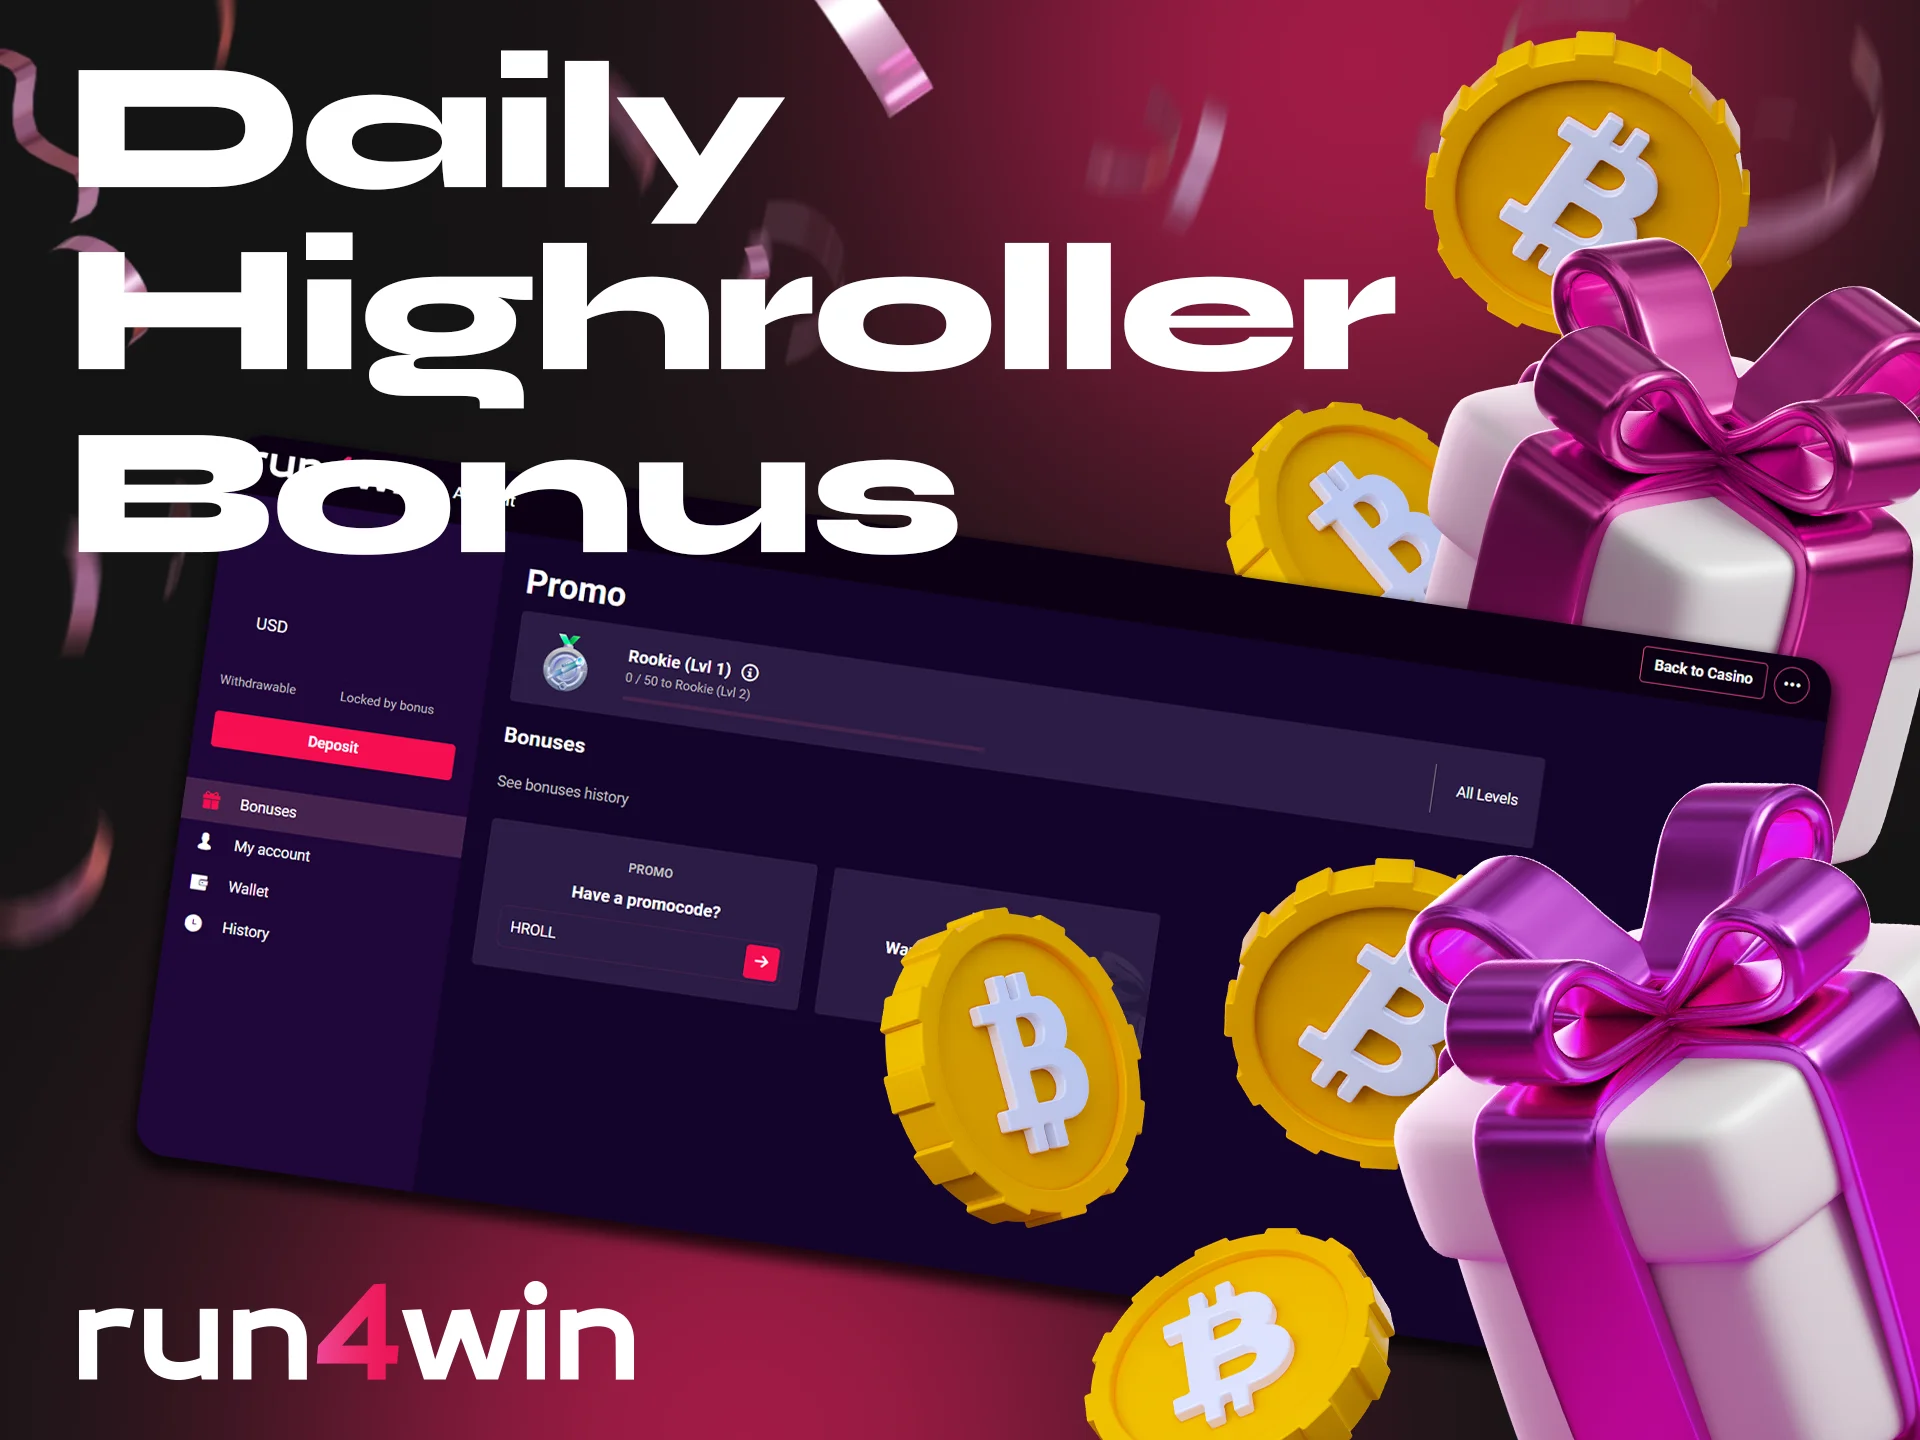 Sign up on the Run4Win website and claim your Daily Highroller Bonus.